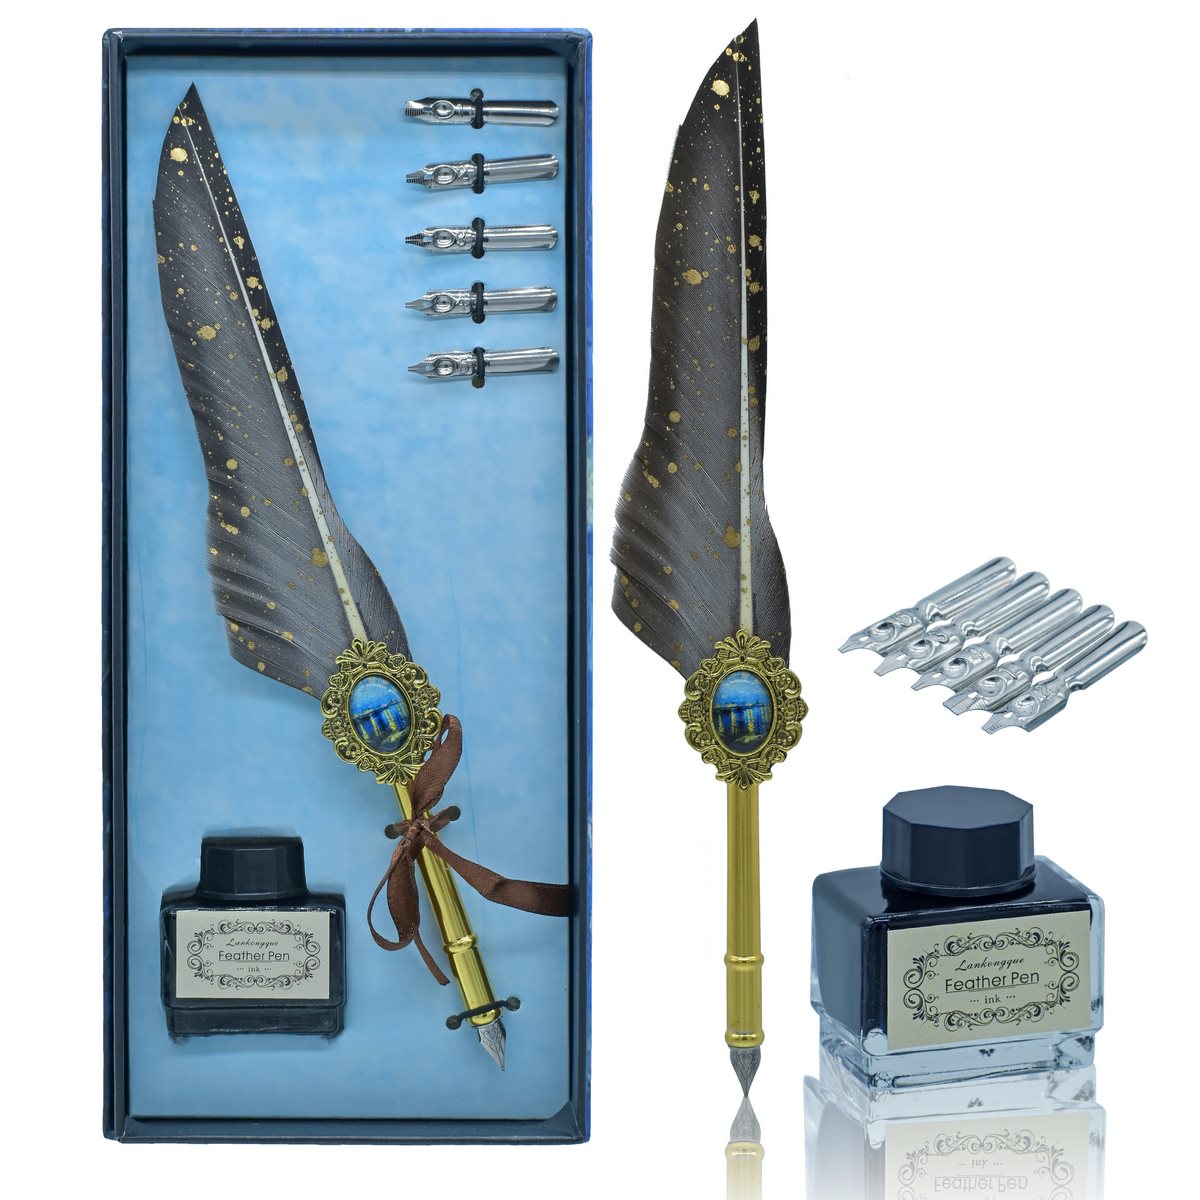 Golden Feather Fountain Pen Gift Set with Blue Diamond - For Return Gift, Office Use, Personal Use, or Corporate Gifting 4